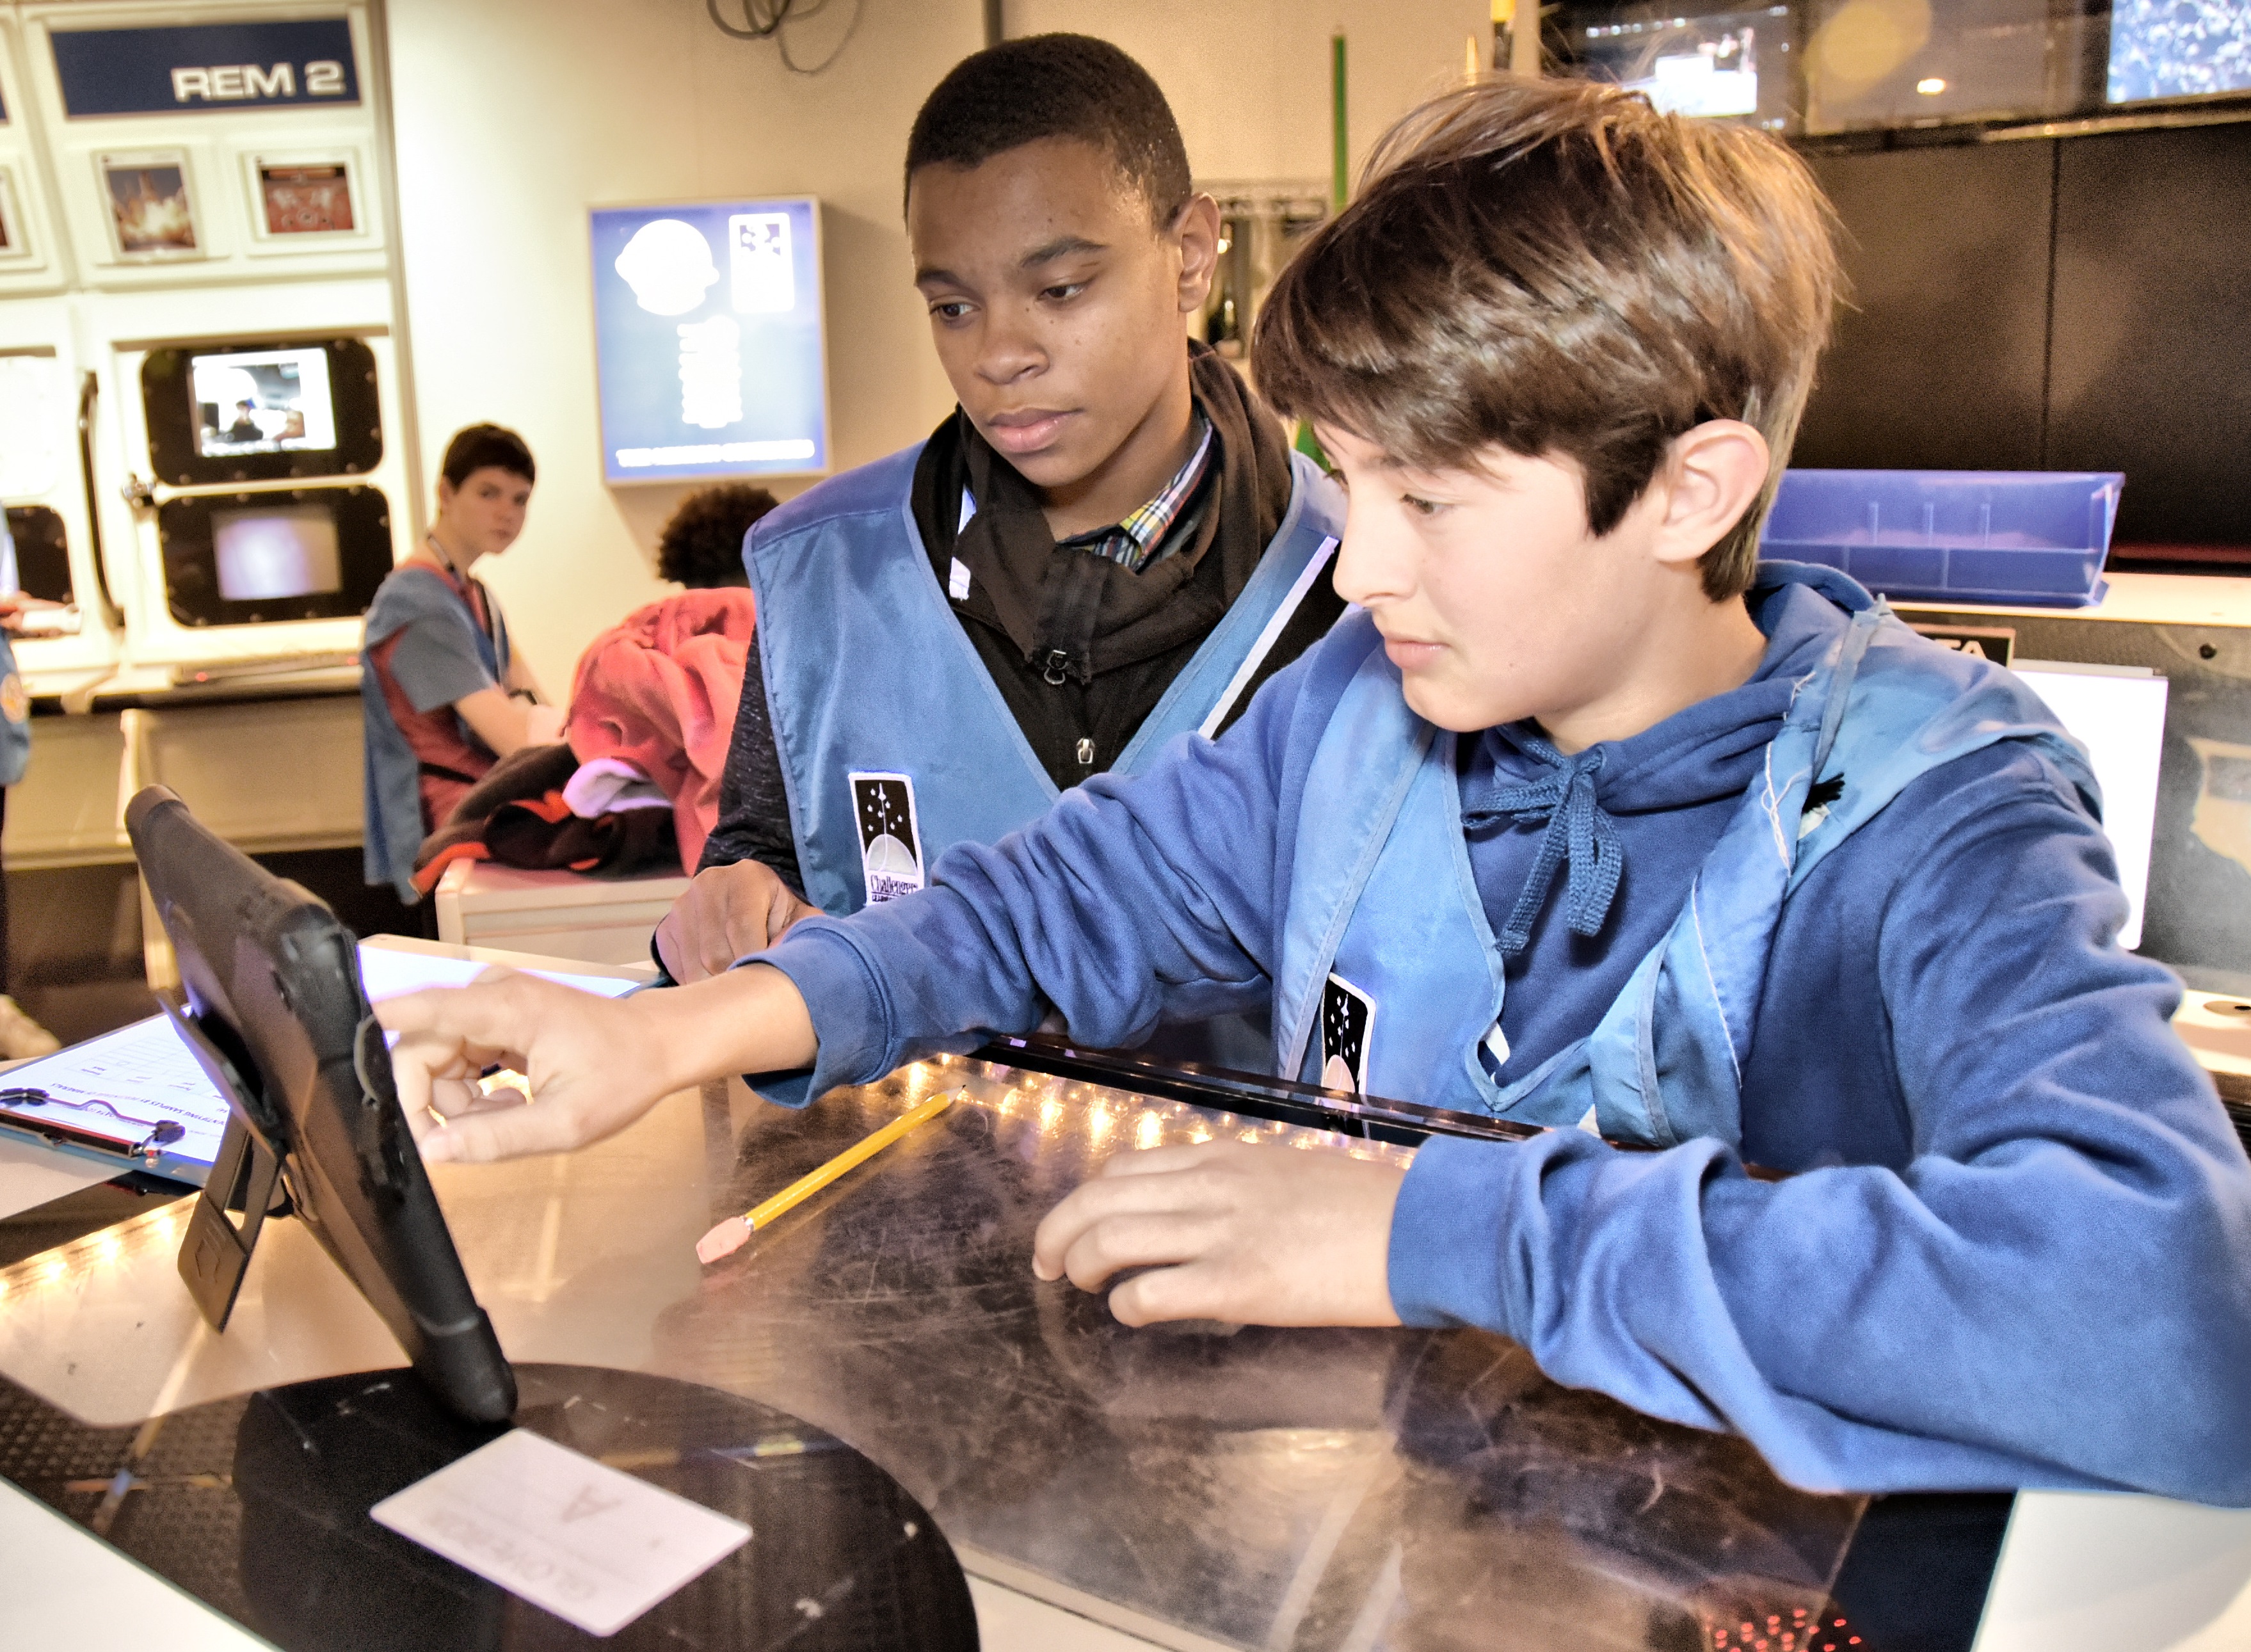 In Space Station, students are astronauts. They conduct experiments, take measurements, and collect data to submit to Mission Control for analysis. Fred Singletary and Micah Elliot, students from Hand Middle School, complete tasks at the glovebox.